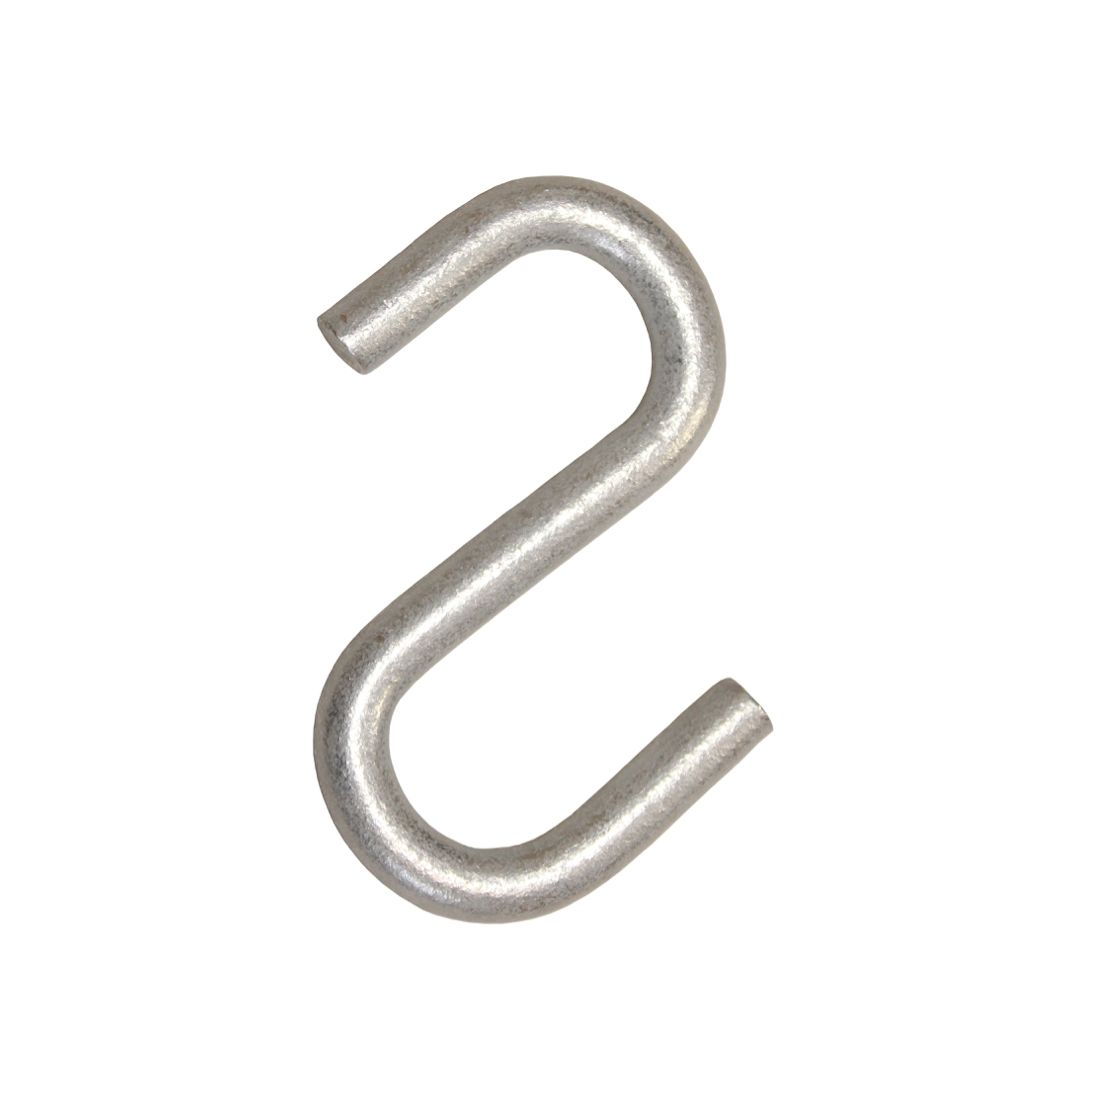 Order Standard or Large S-Hooks for Swing Sets and Get Fast Shipping